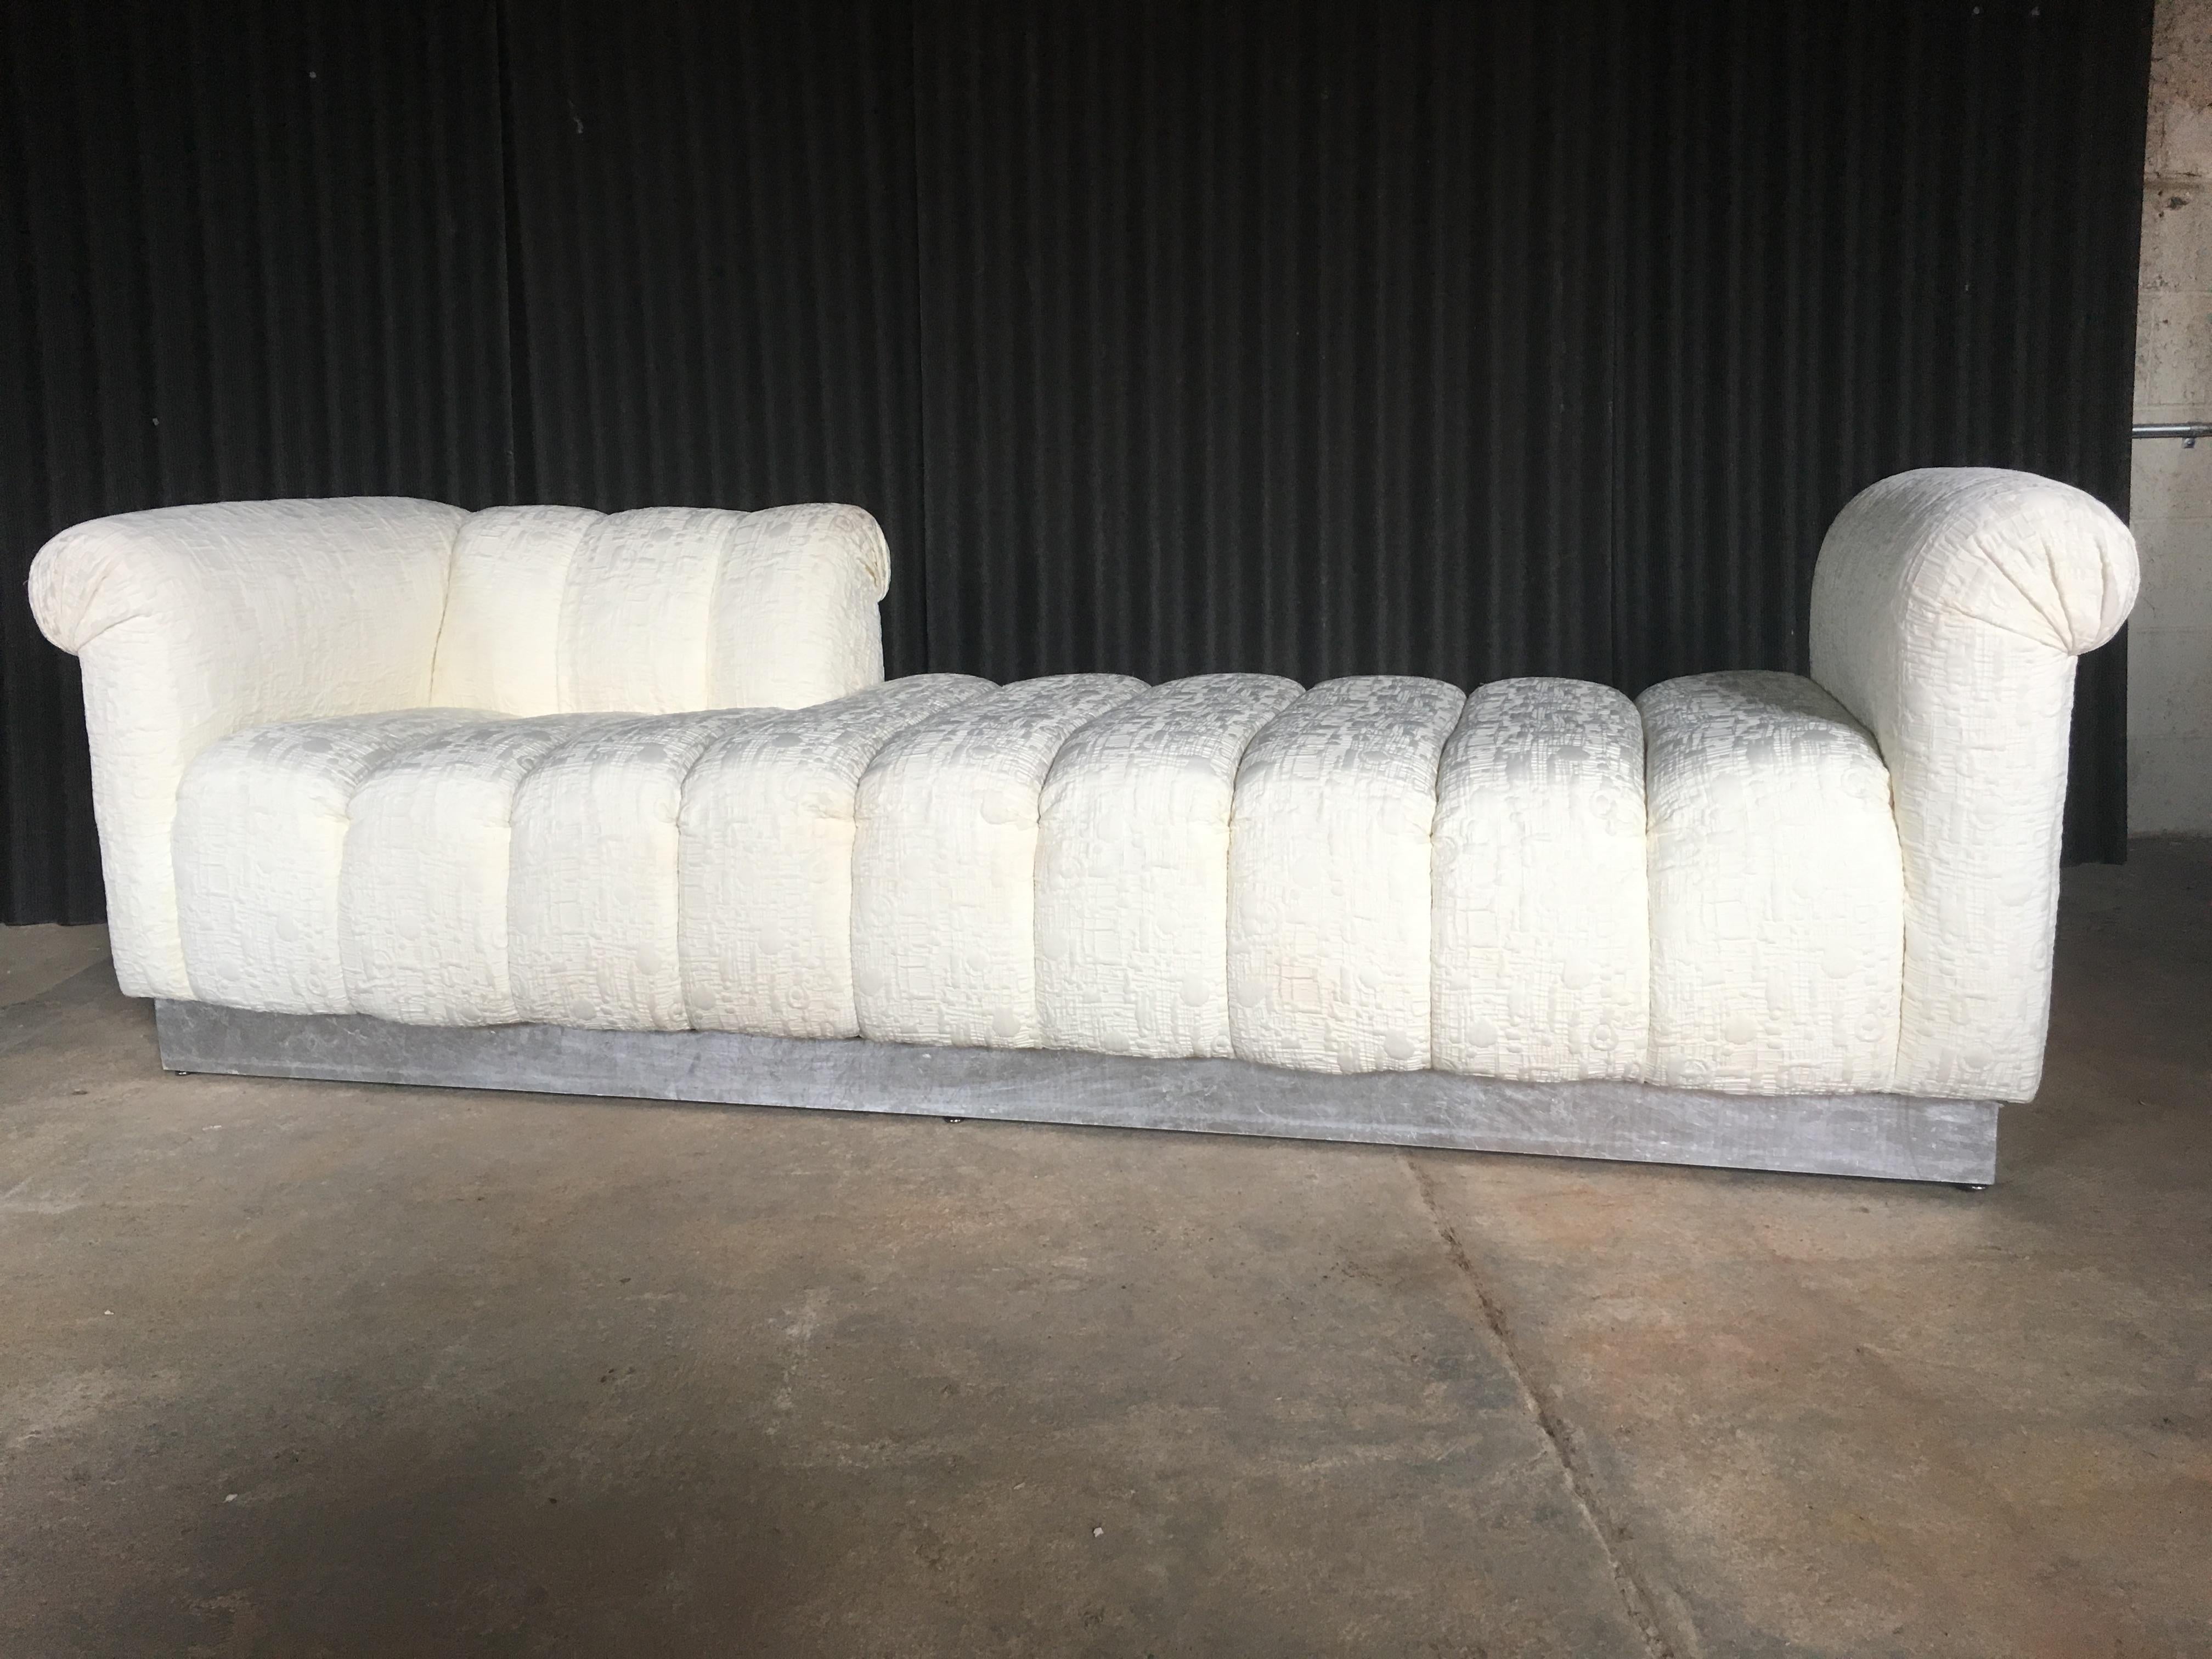 One of the most fantastic chaise Lounges that you'll ever run across.
Ivory, richly texted fabric, is in fantastic condition with no rips tears or stains.
Plinth base is wood and is silver leafed, not chrome. Tag underneath reads: Silver Leaf.
One